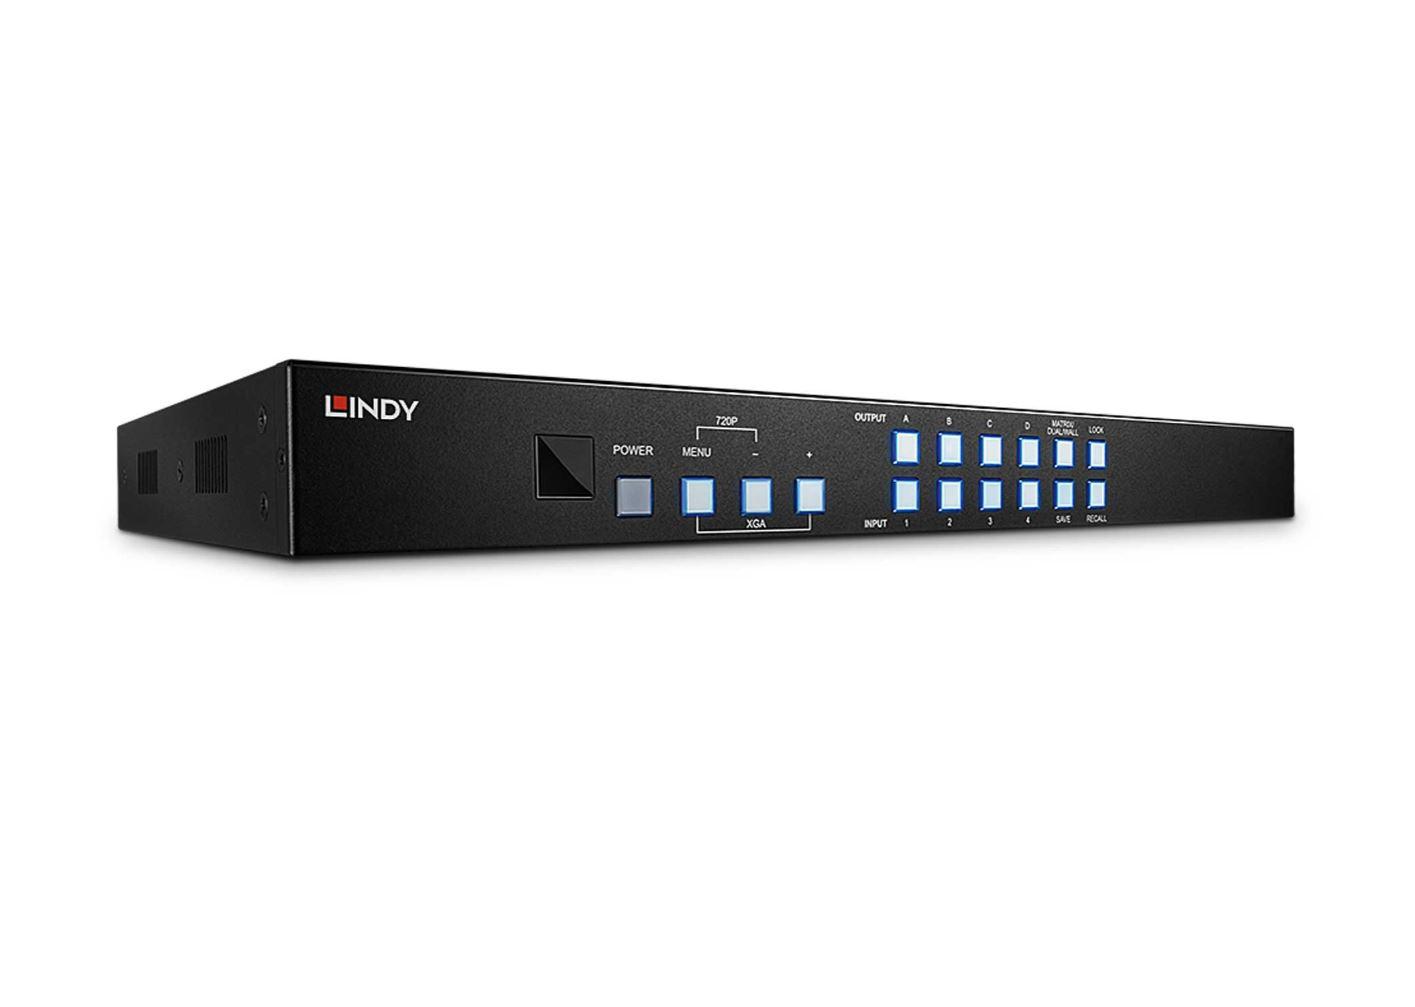 Lindy 4x4 HDMI Matrix Switch with Video Wall Scaling  Technical details  Specifications  AV Interface: HDMI Interface Standard: HDMI 1.3 Supports Bandwidth: 6.75 Gbps Maximum Resolution: 1920x1080@60Hz 4:4:4 12bit HDCP Support: 1.1 Supported Audio: Audio Pass-through IR Support : 20-60kHz CEC